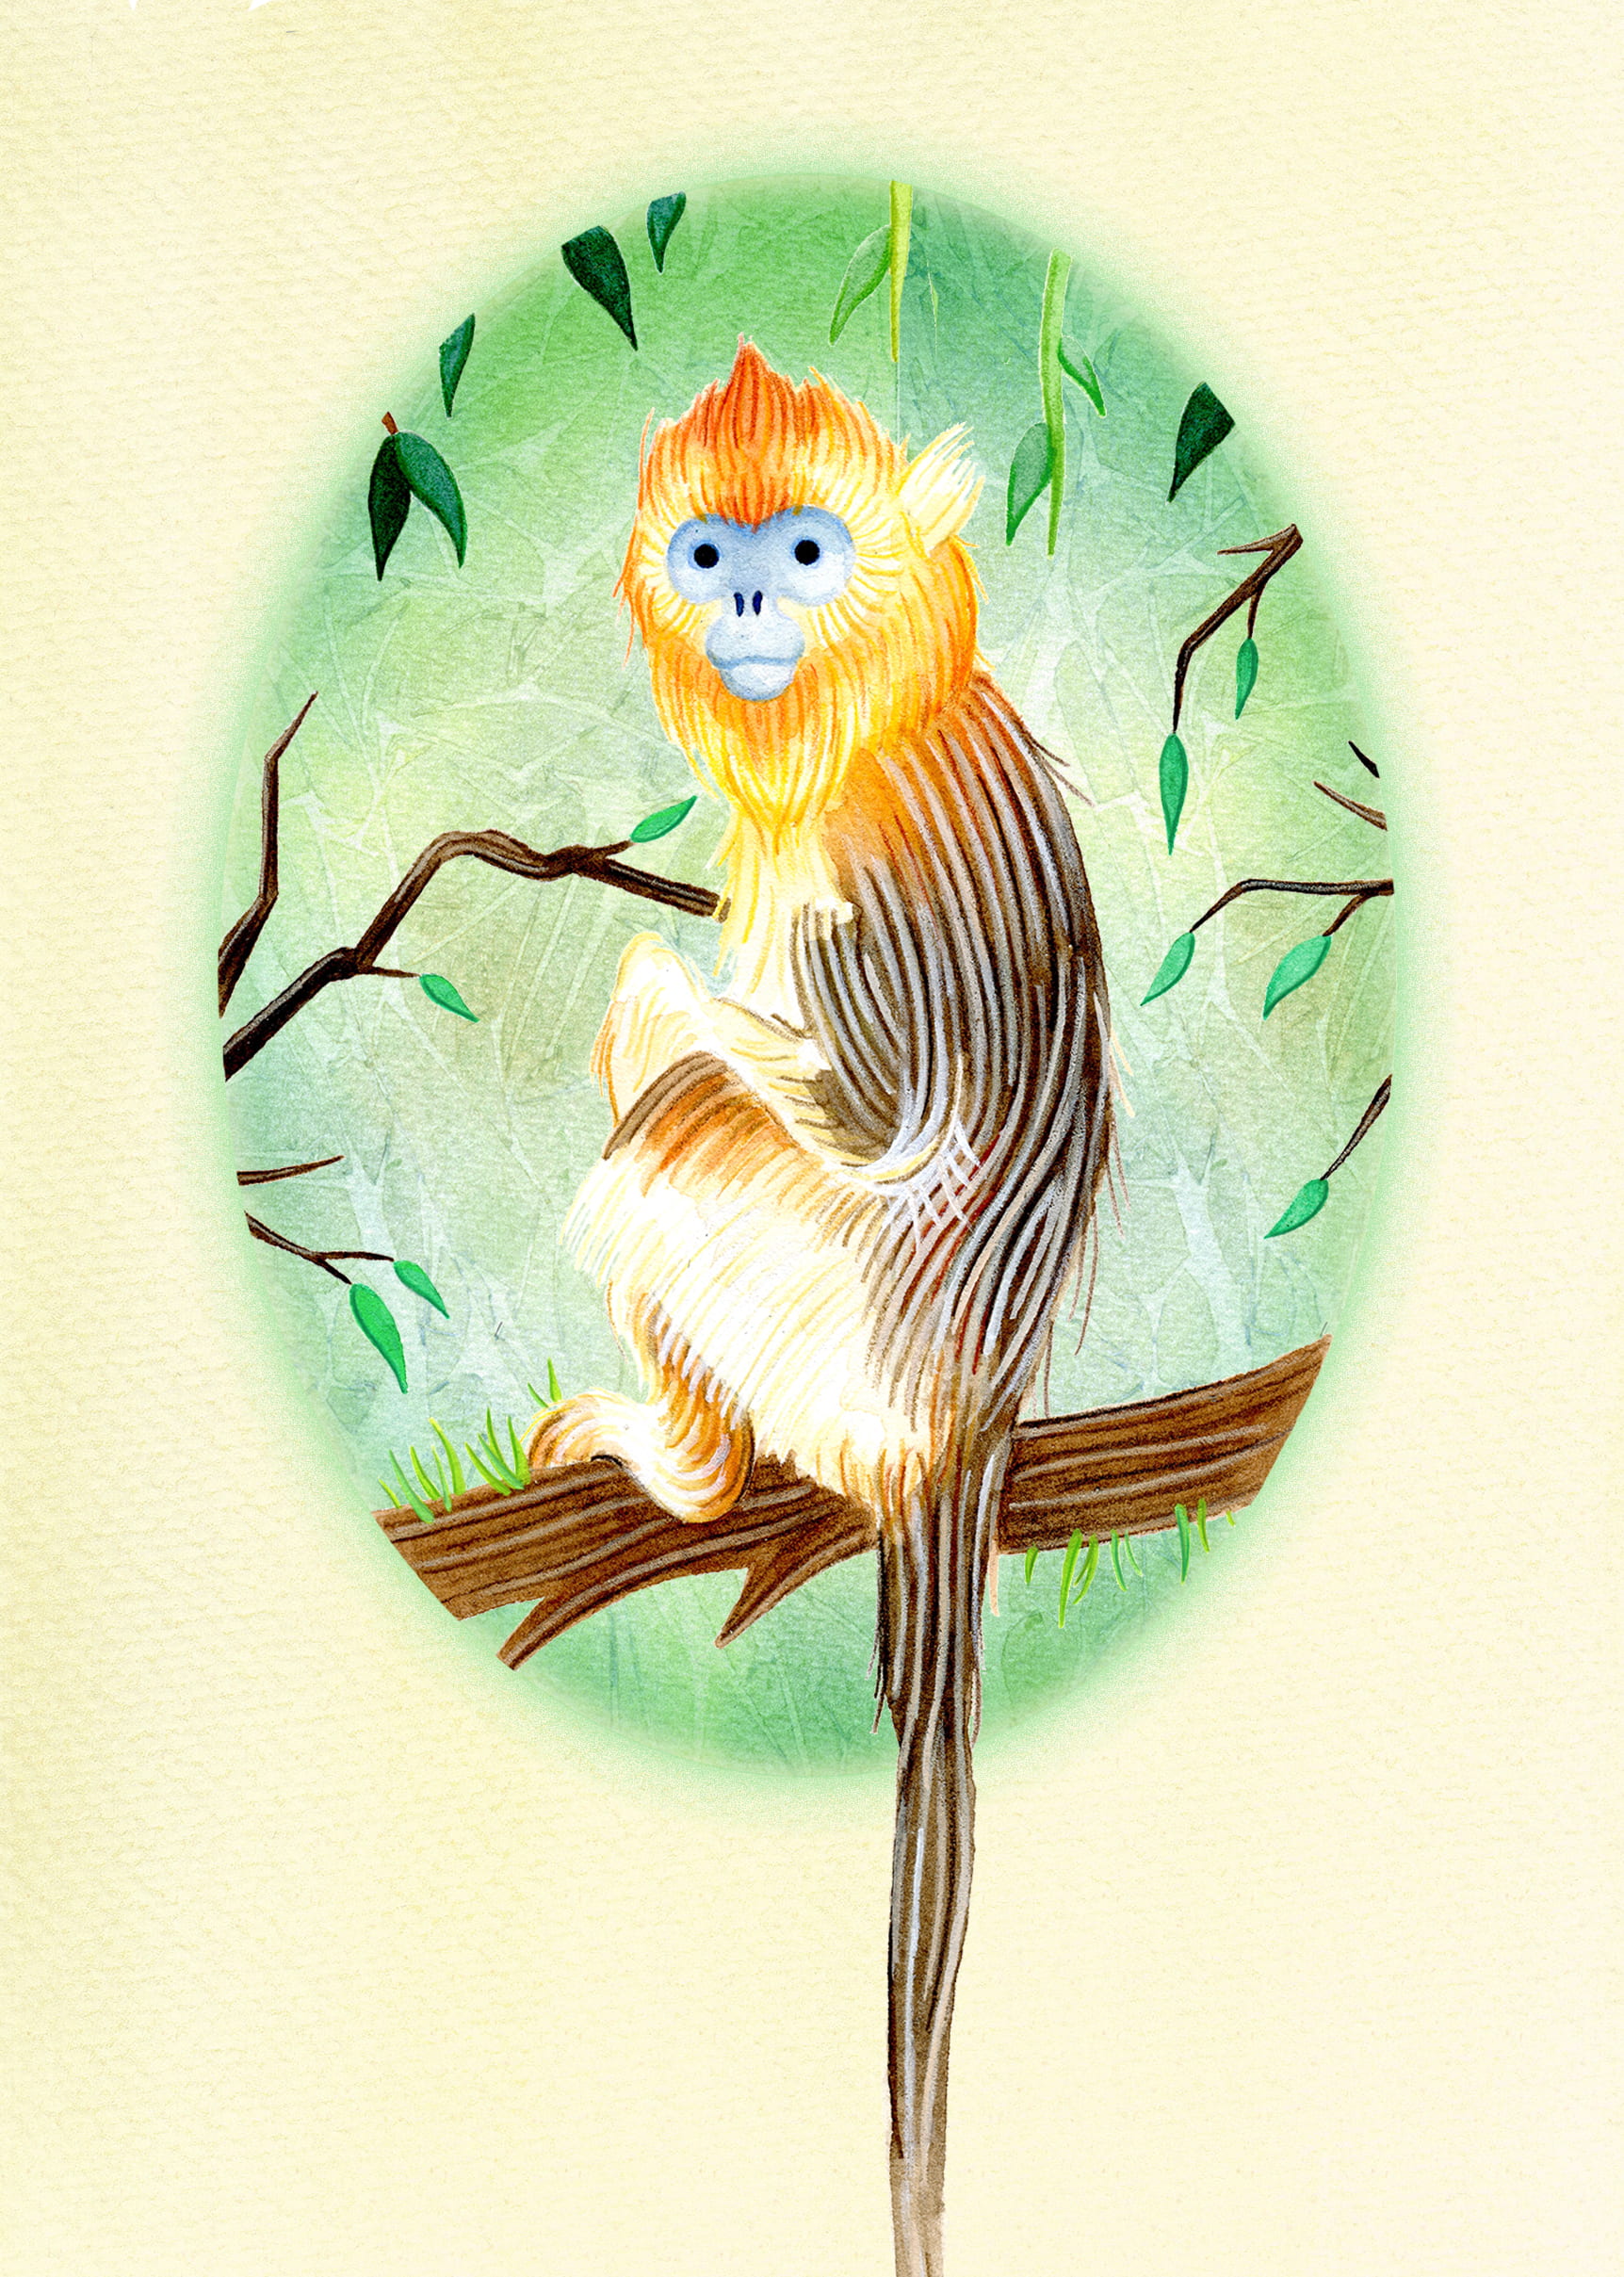 Painting of a Golden Snub Nosed Monkey, sitting on a tree branch.